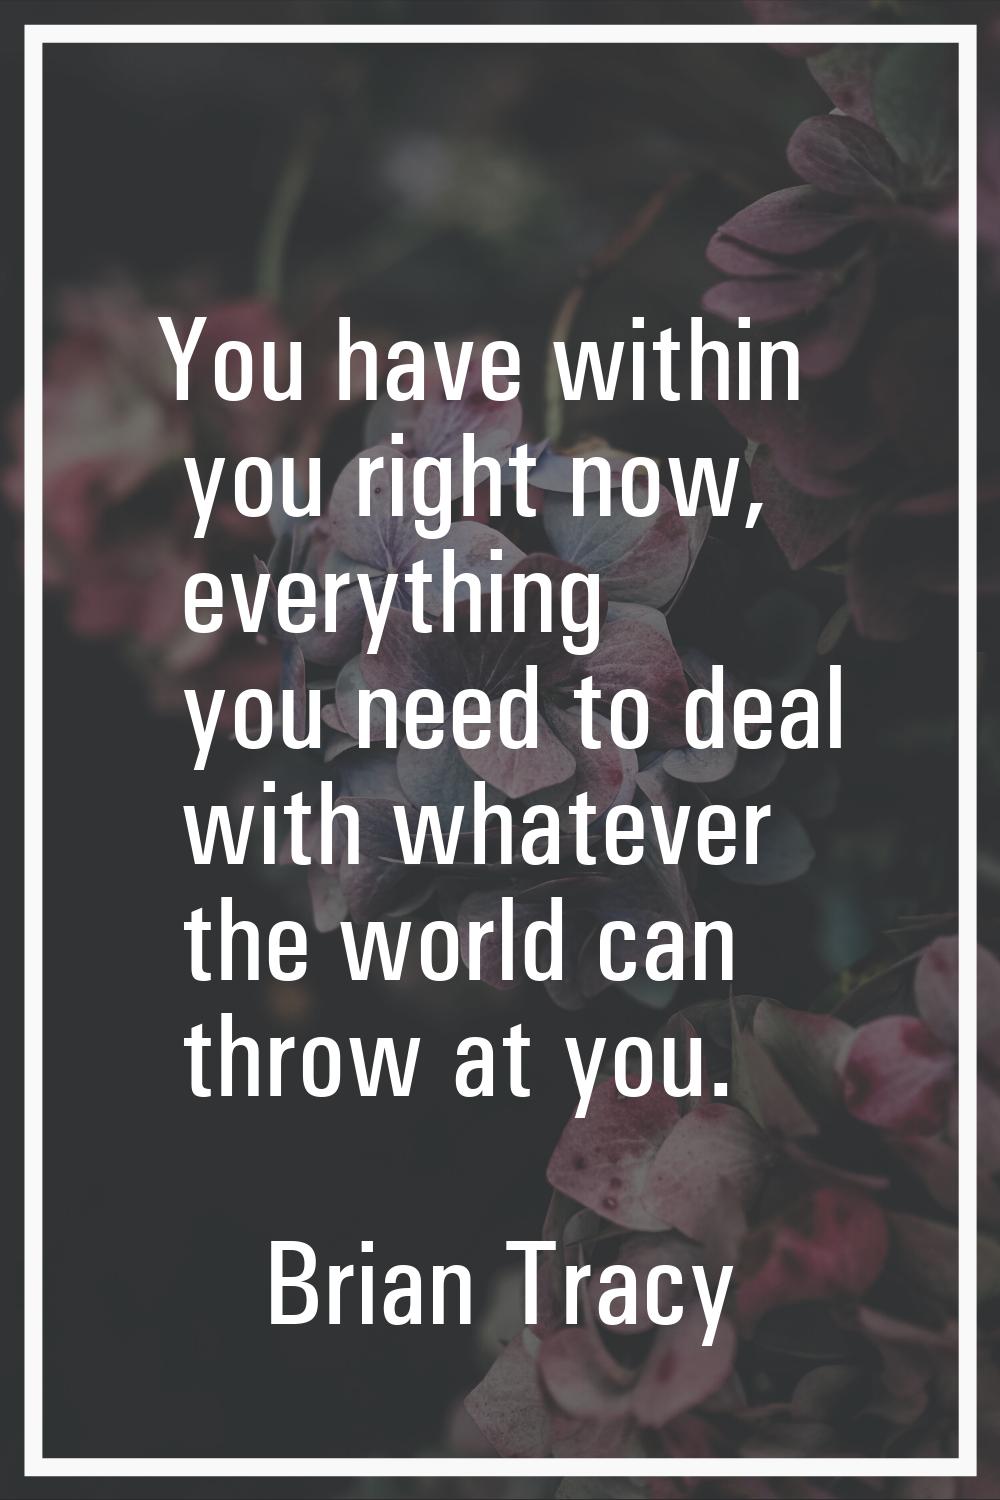 You have within you right now, everything you need to deal with whatever the world can throw at you